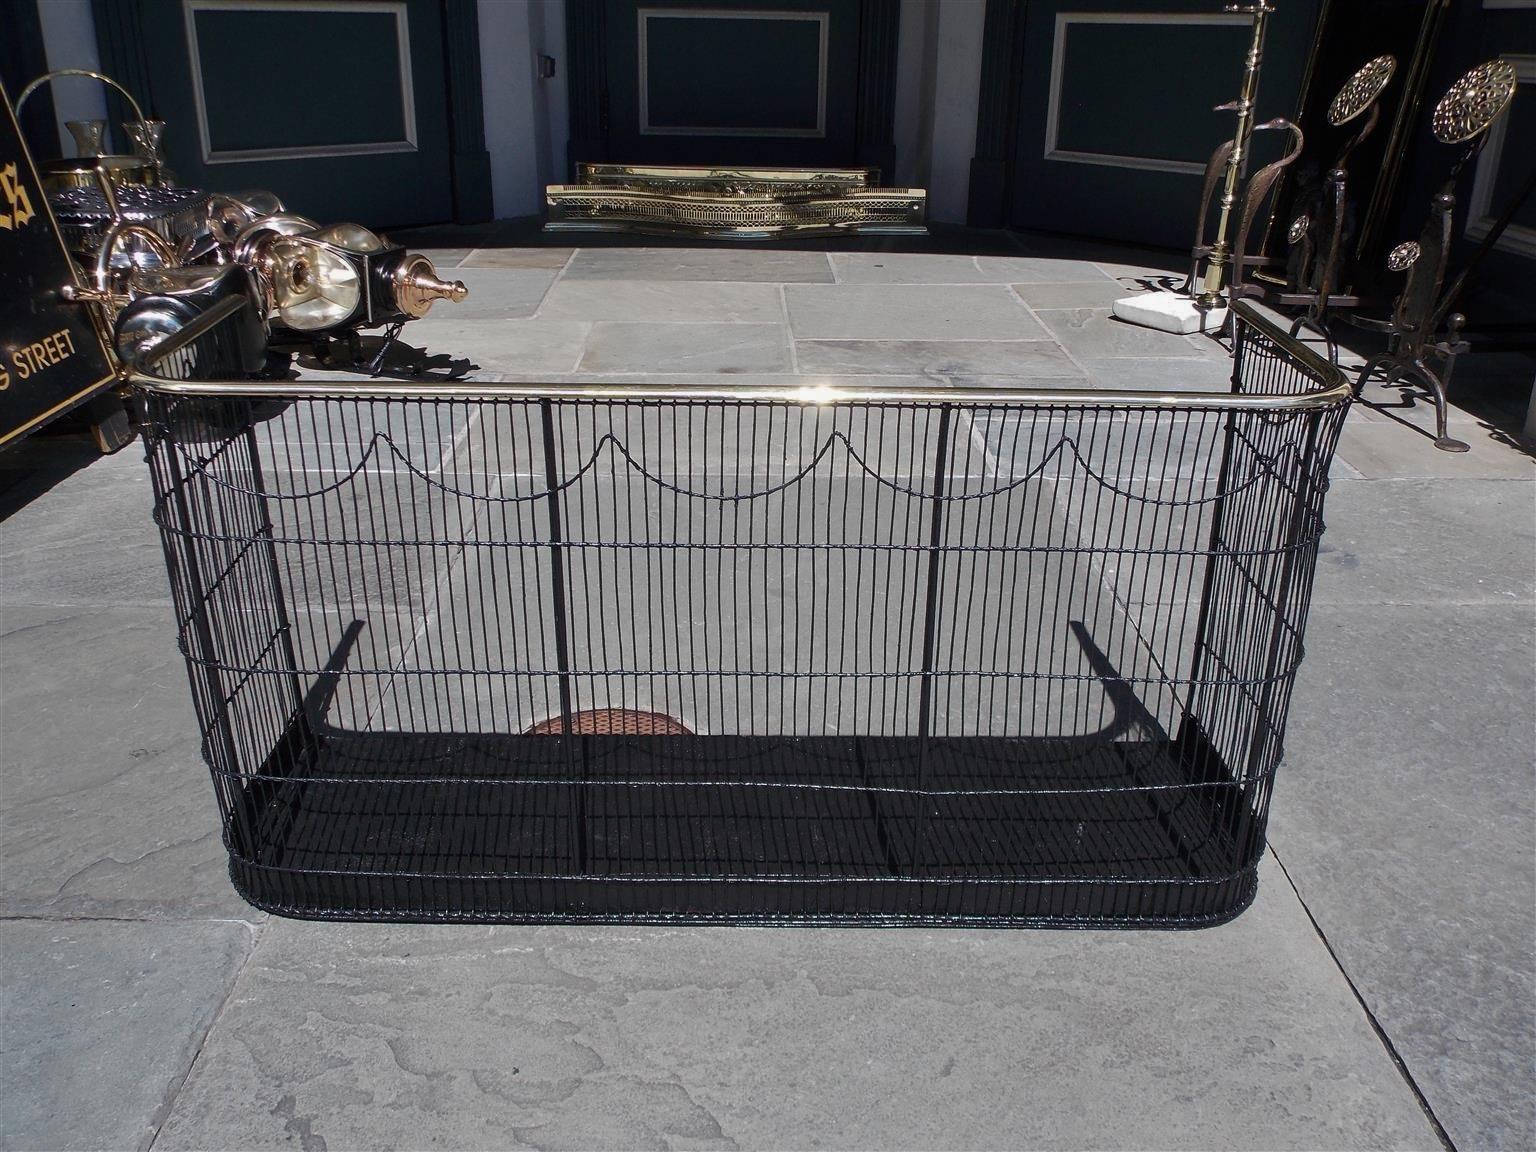 American wrought iron and brass rail top nursery wire fender with connecting swags and interior iron pan, Early 19th century. Pan can be removed if desired by local blacksmith at no additional cost.